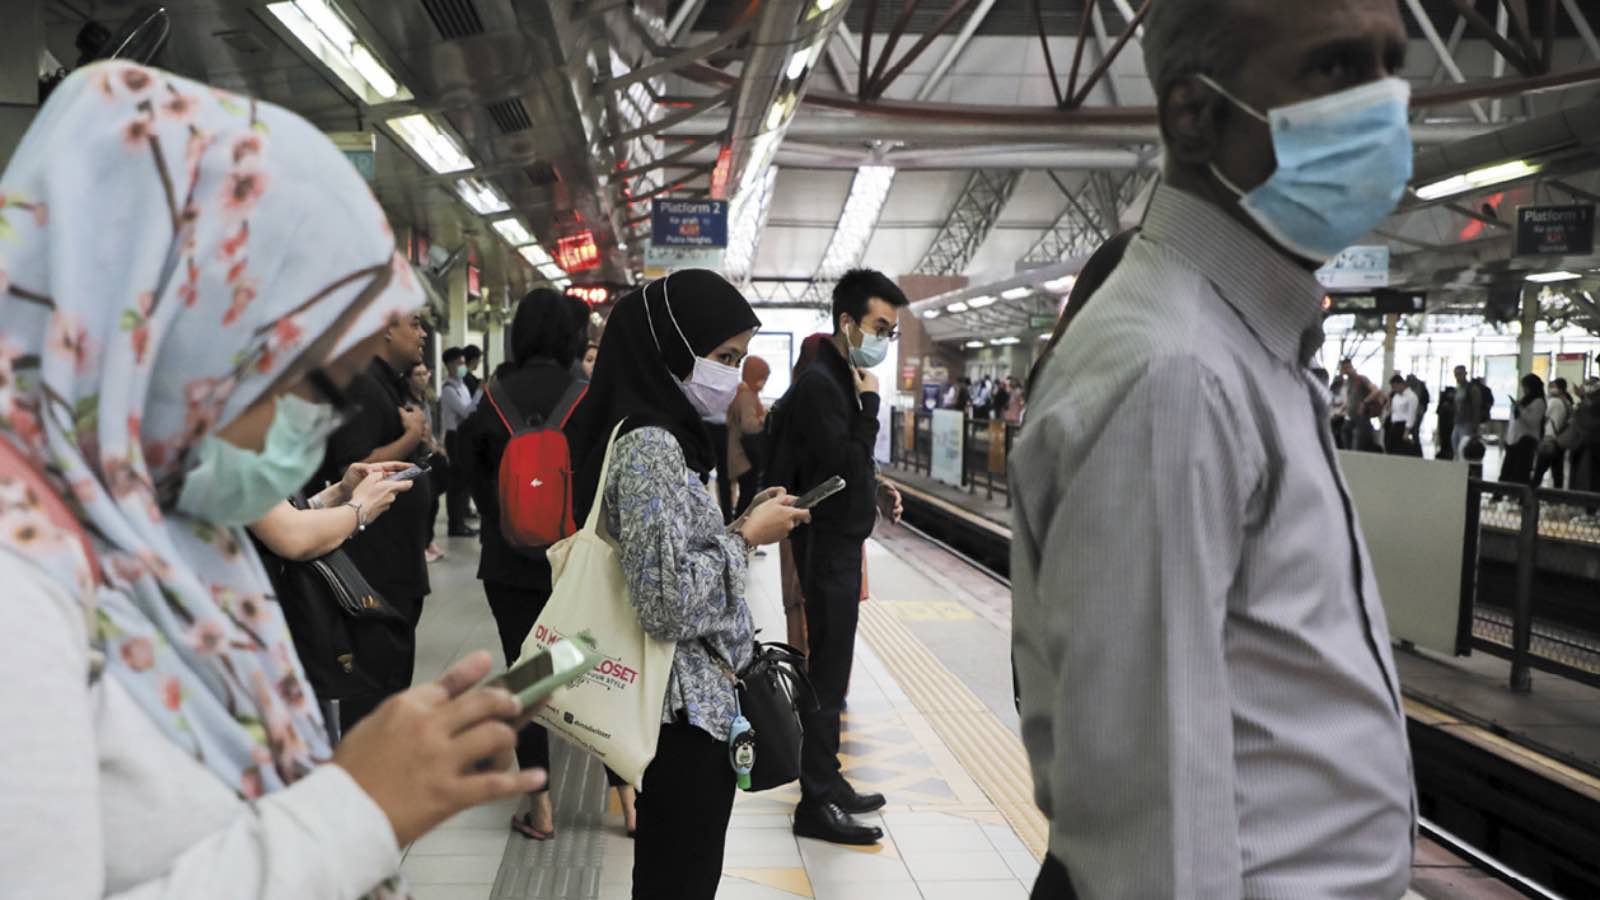 Passengers wear protective masks while they wait for Light Rail Transit train at a station, following the outbreak of the new coronavirus in China, in Kuala Lumpur, Malaysia, February 10, 2020. REUTERS/Lim Huey Teng